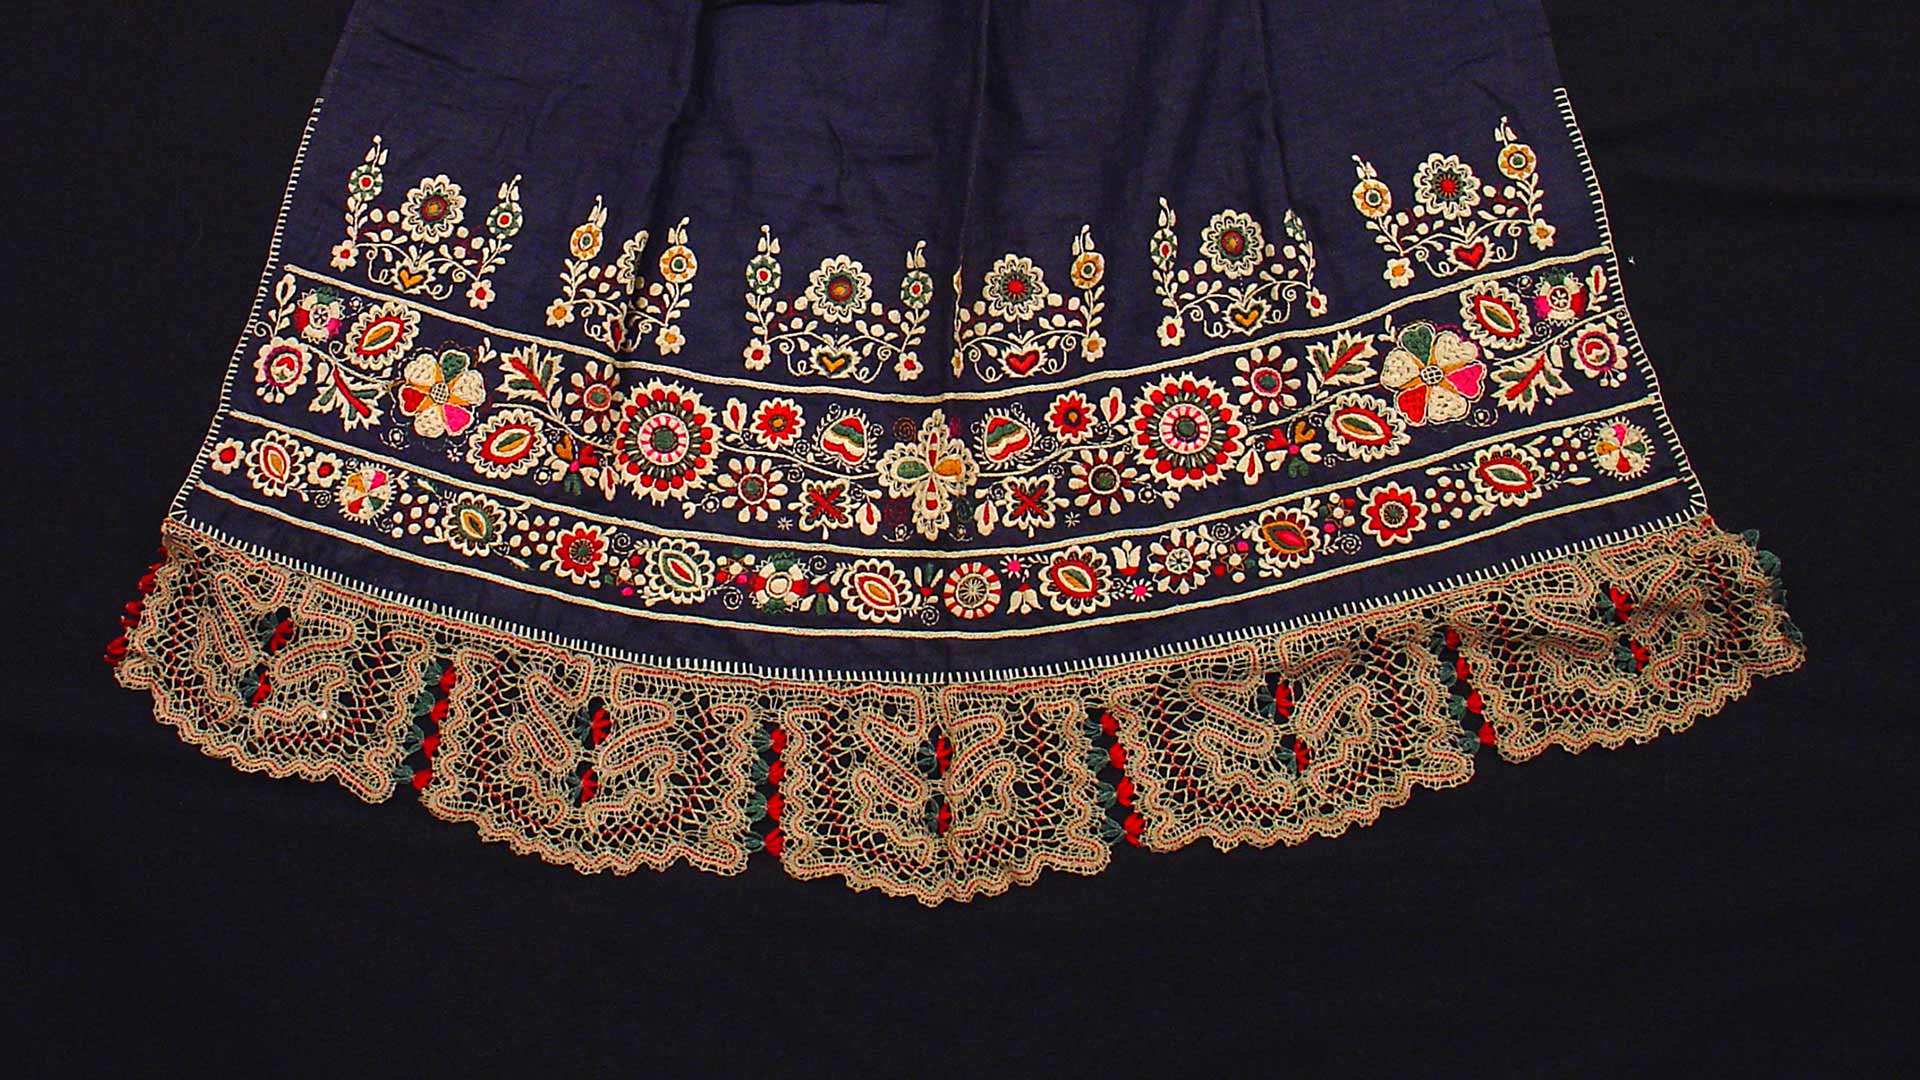 Elaborate embroidery and lace on the bottom of a navy blue skirt. The embroidery and lace are floral patterns of cream, red, green, and pink colors. 